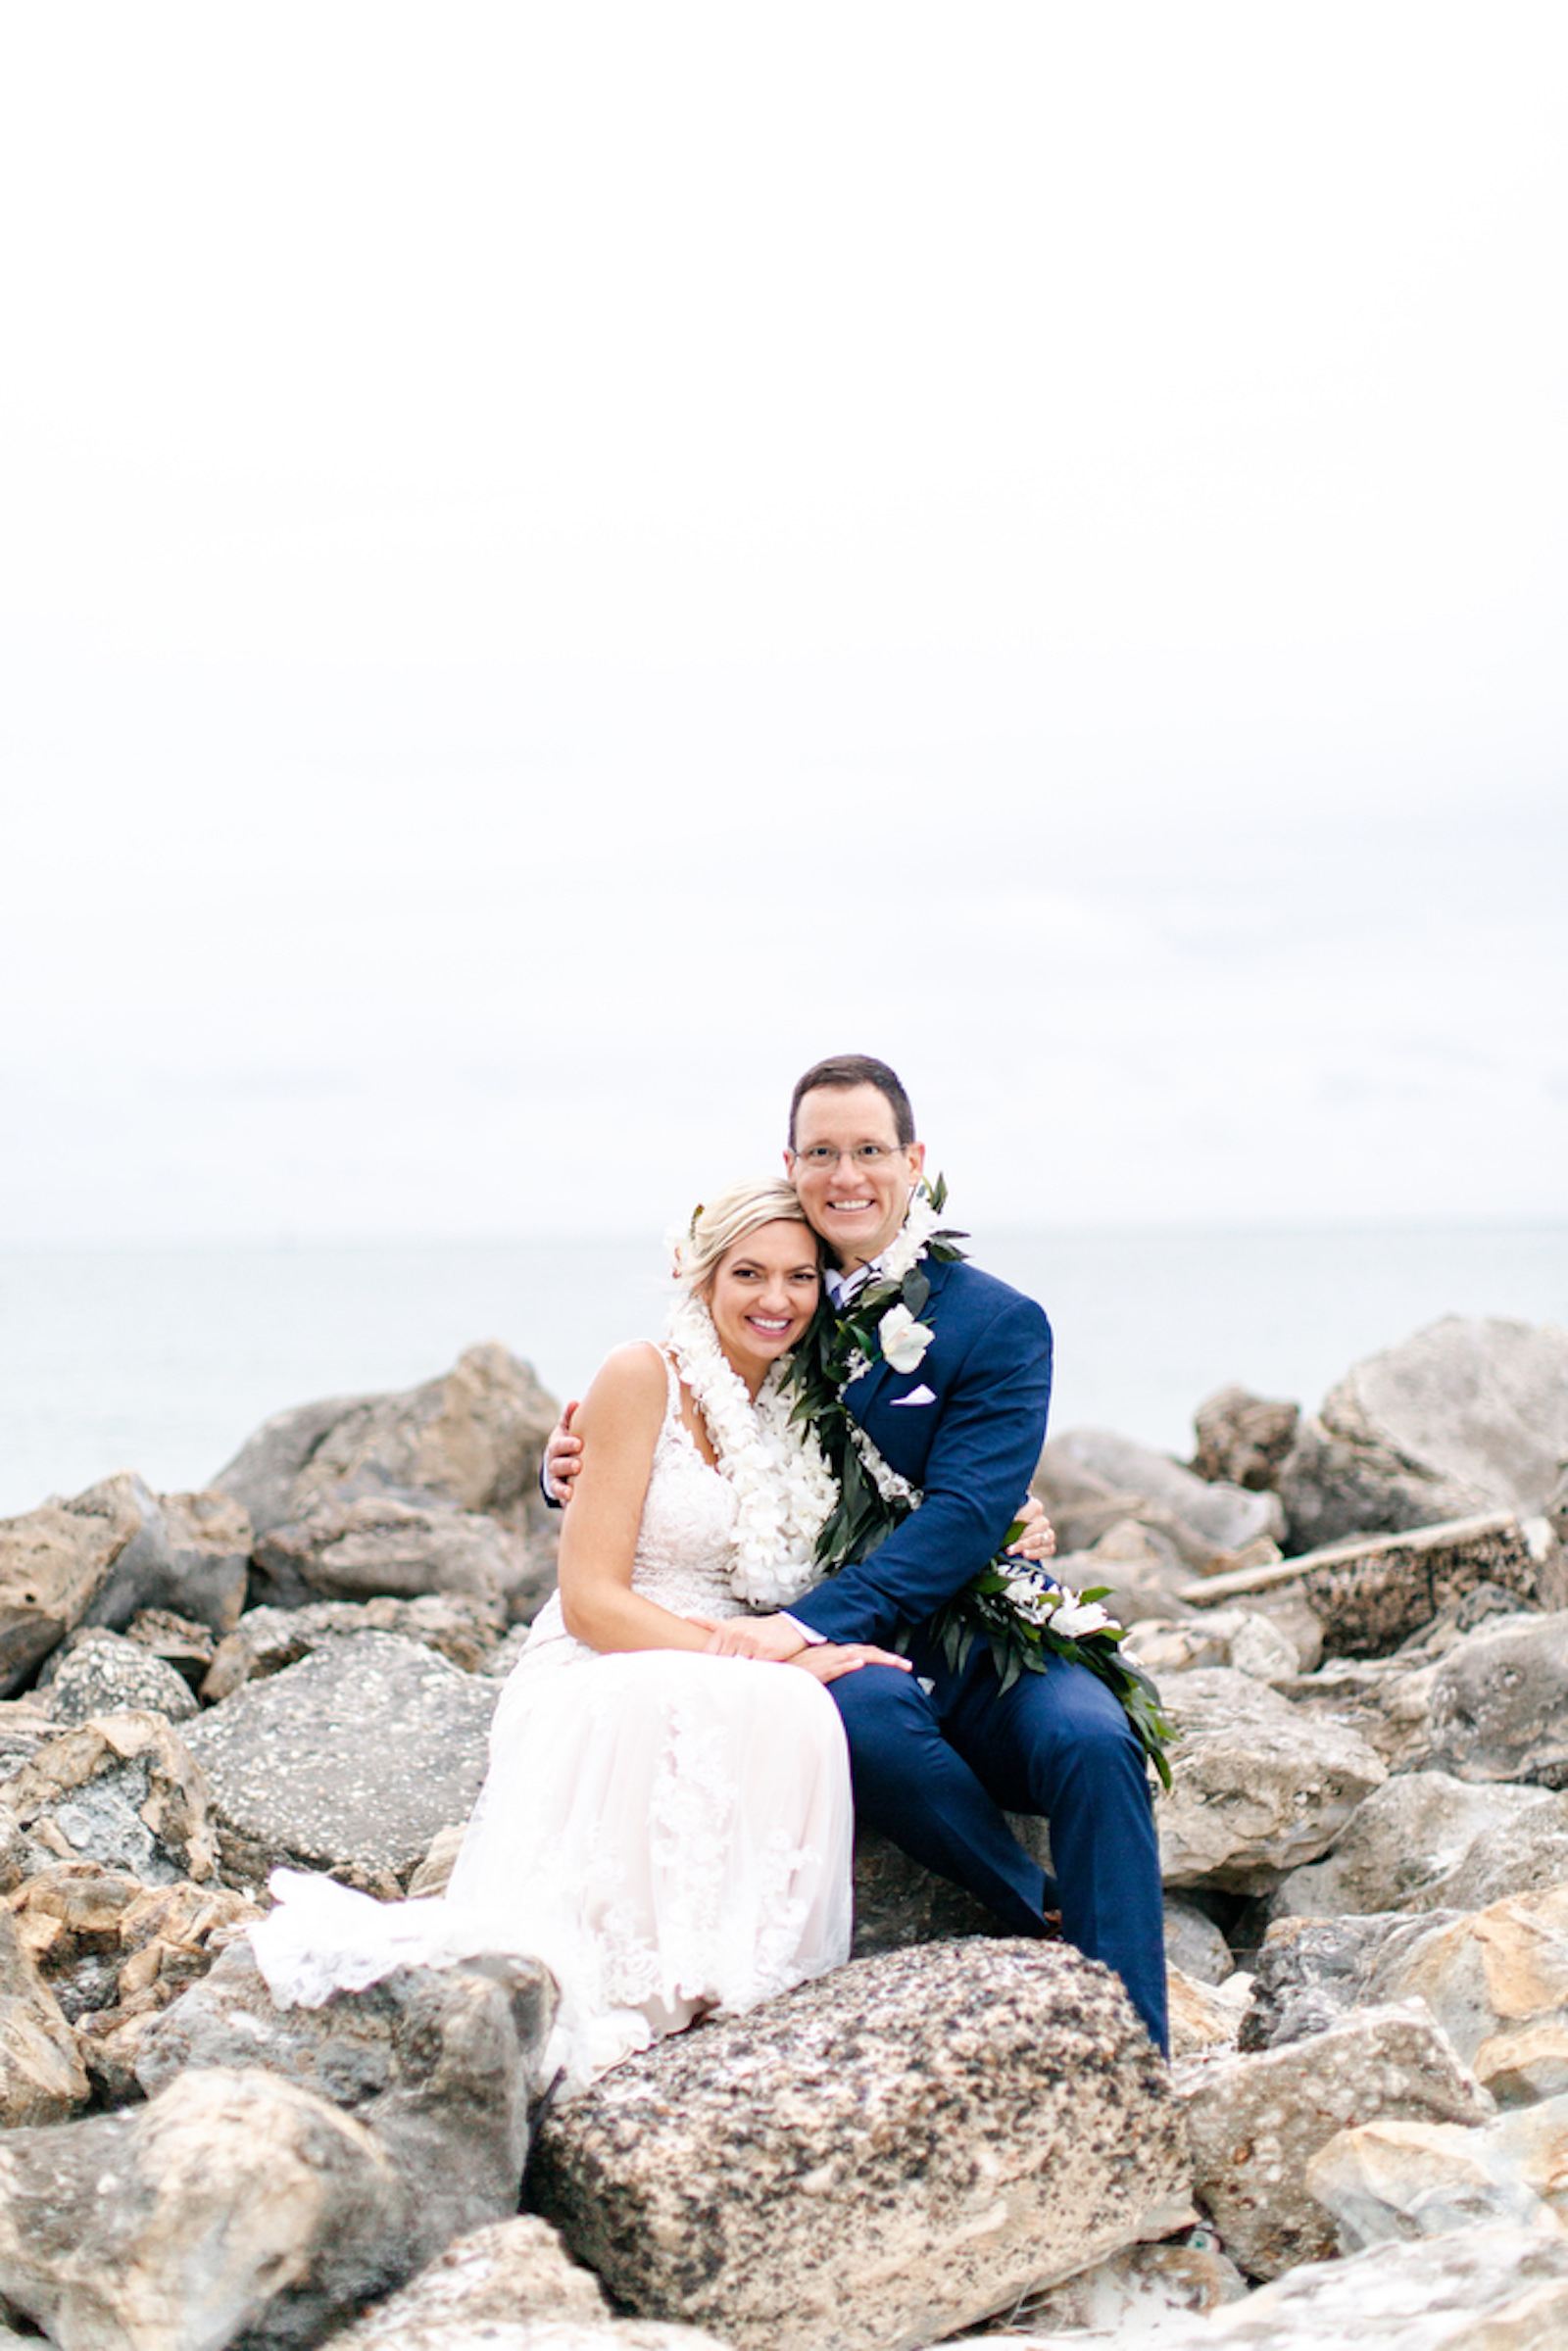 Tropical Clearwater Beach Bride and Groom Sitting on Rocks